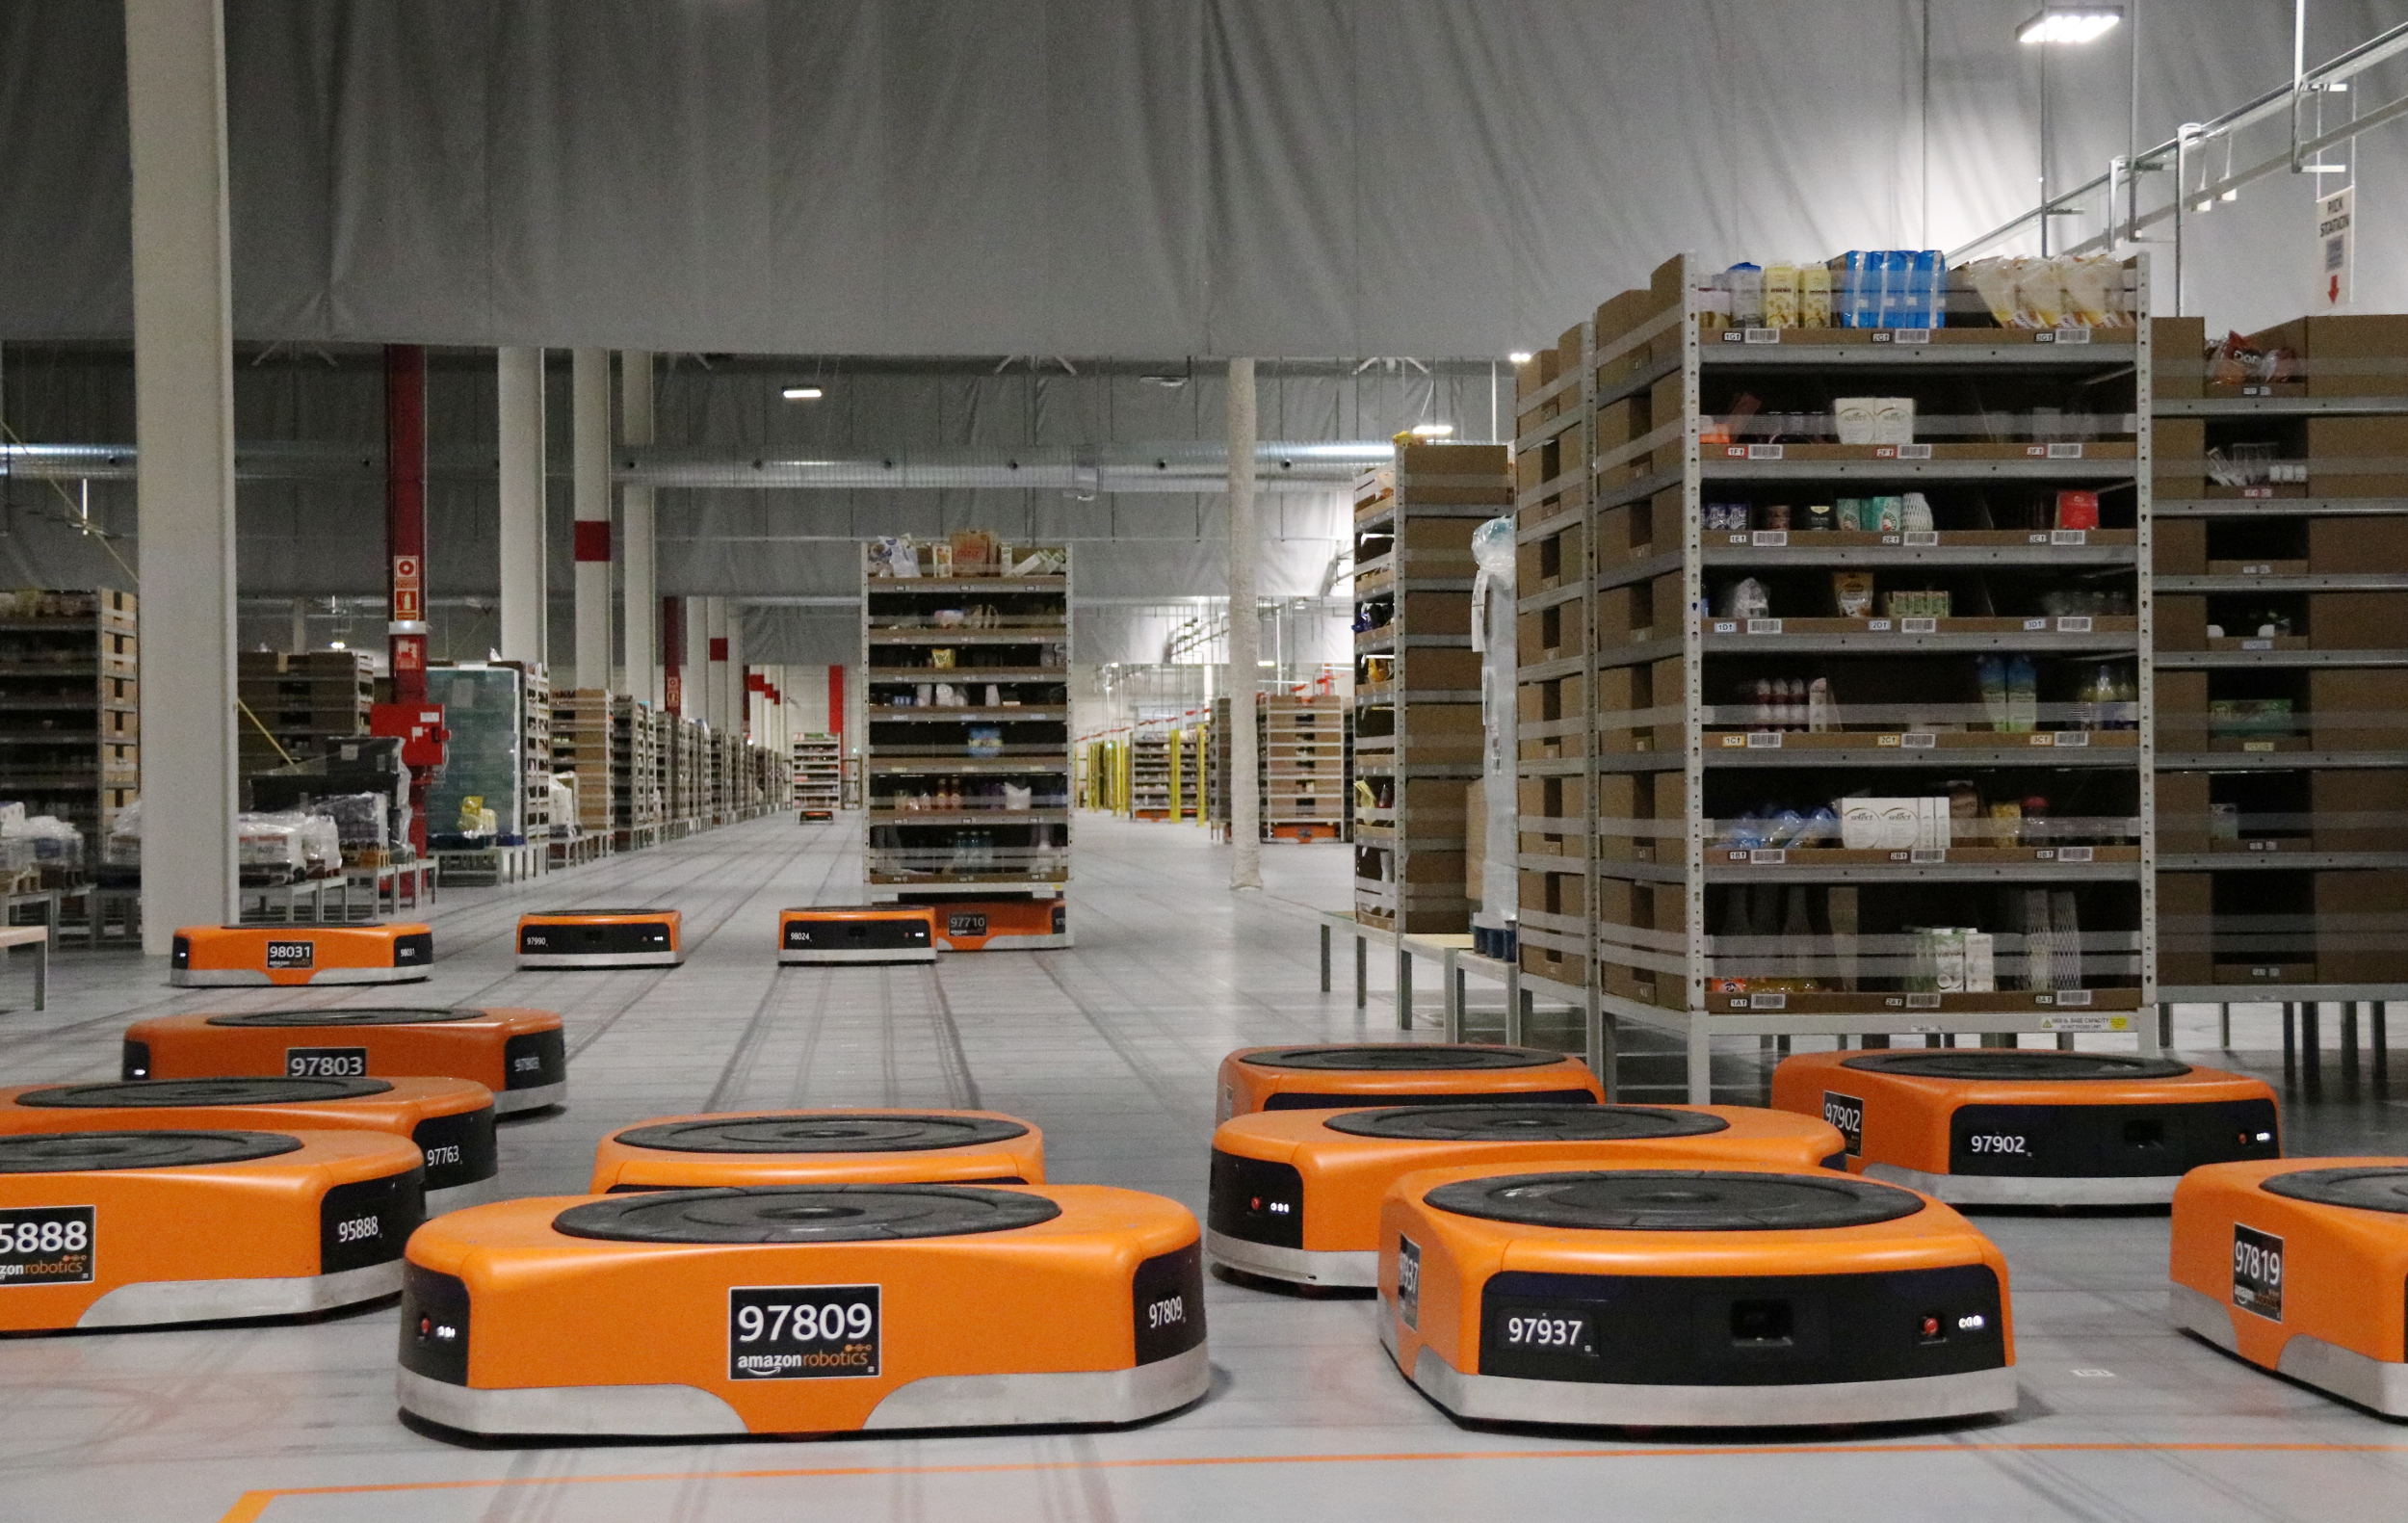 Robots at the Amazon warehouse in Castellbisbal, April, 26 2017 (By Àlex Recolons)